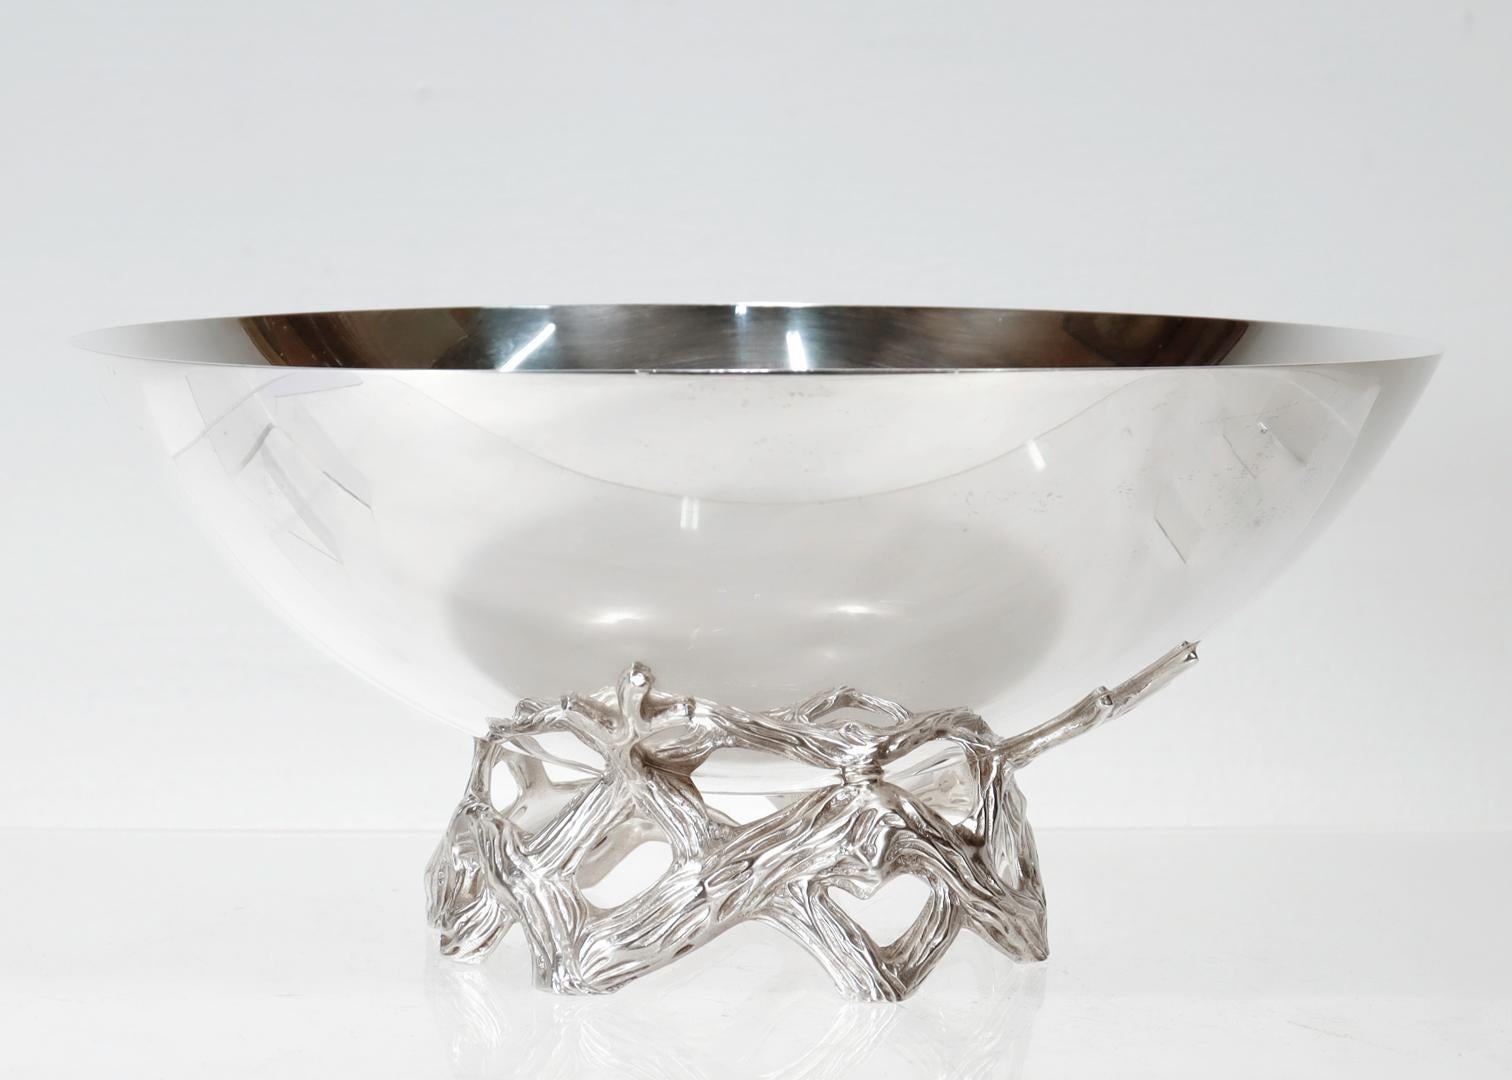 A fine Postmodern presentation or centerpiece bowl.

By Tiffany & Co.

In sterling silver.

Model No. 23886.

The bowl with a naturalistic base comprised of stylized intertwined branches or vines.

Fully marked to the base.

Simply wonderful Tiffany